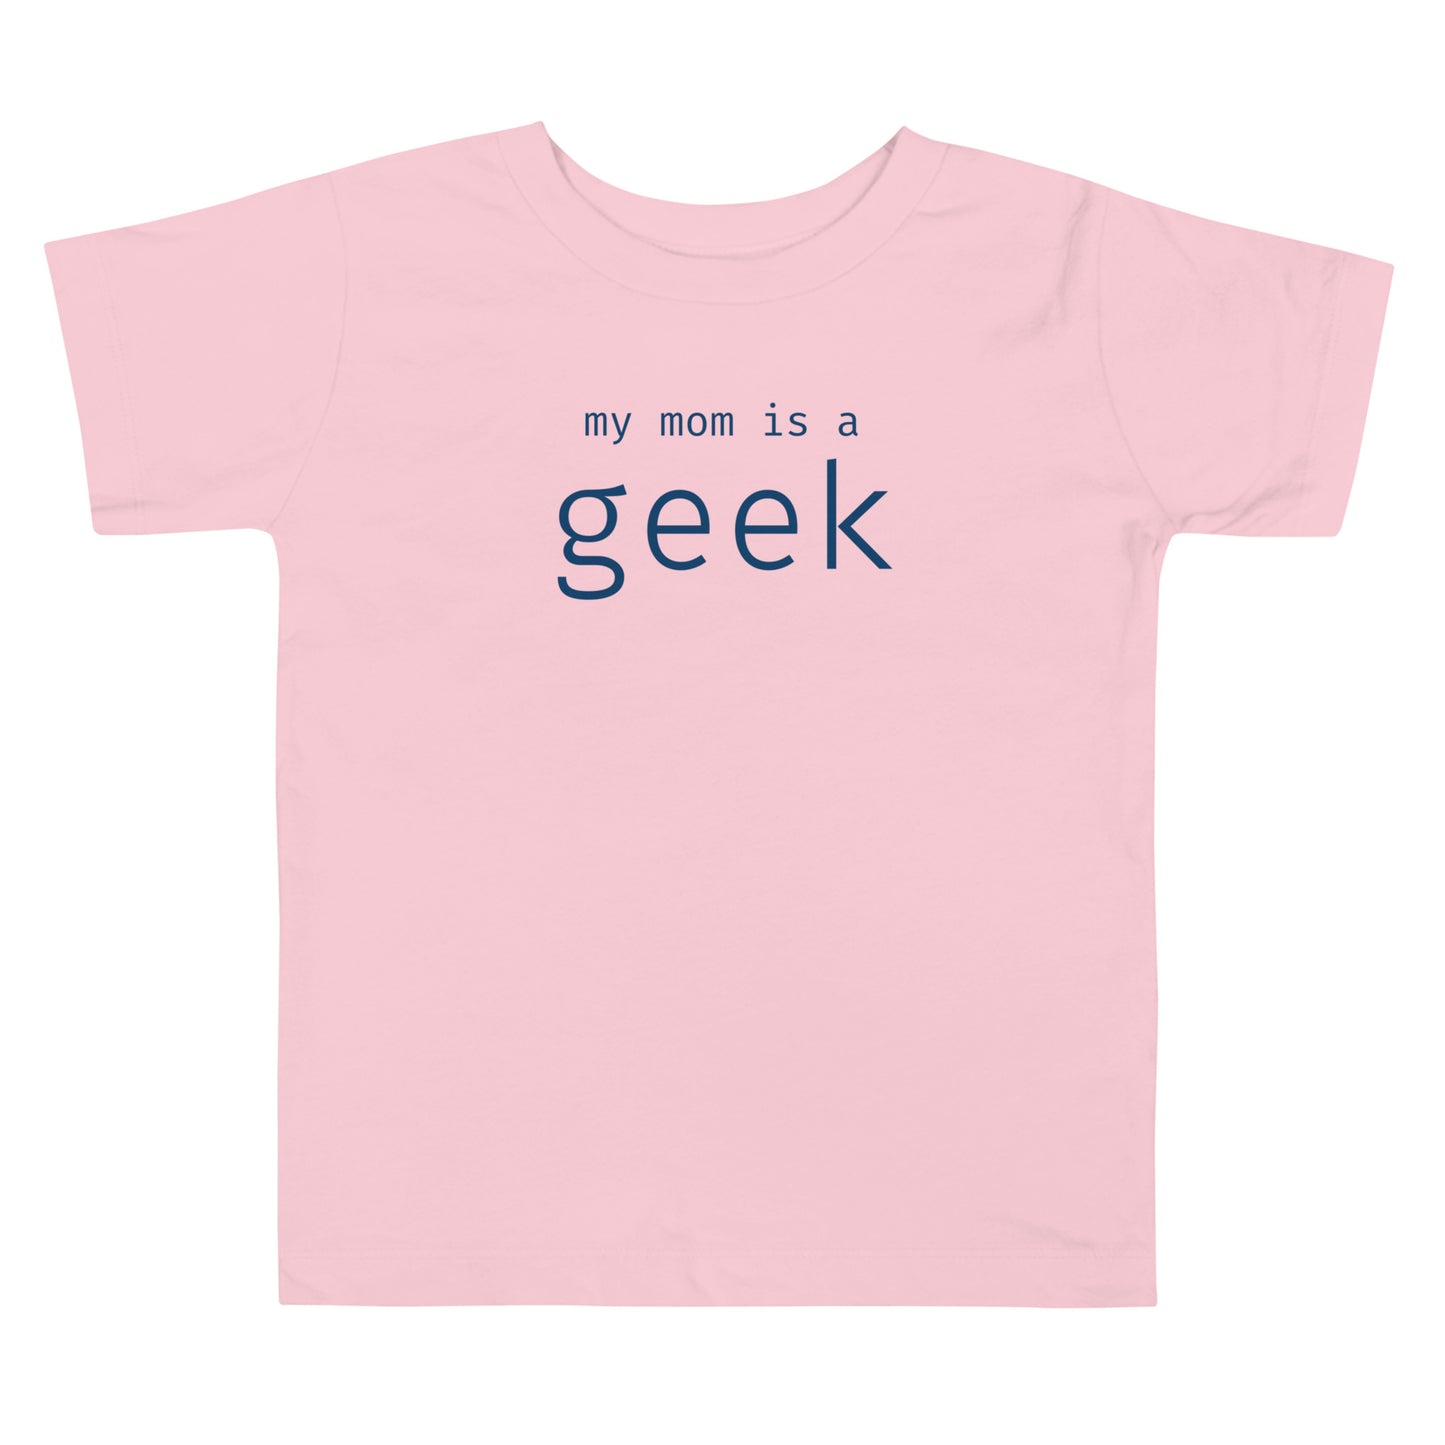 My mom is a geek - Blue Text - Toddler Short Sleeve Tee